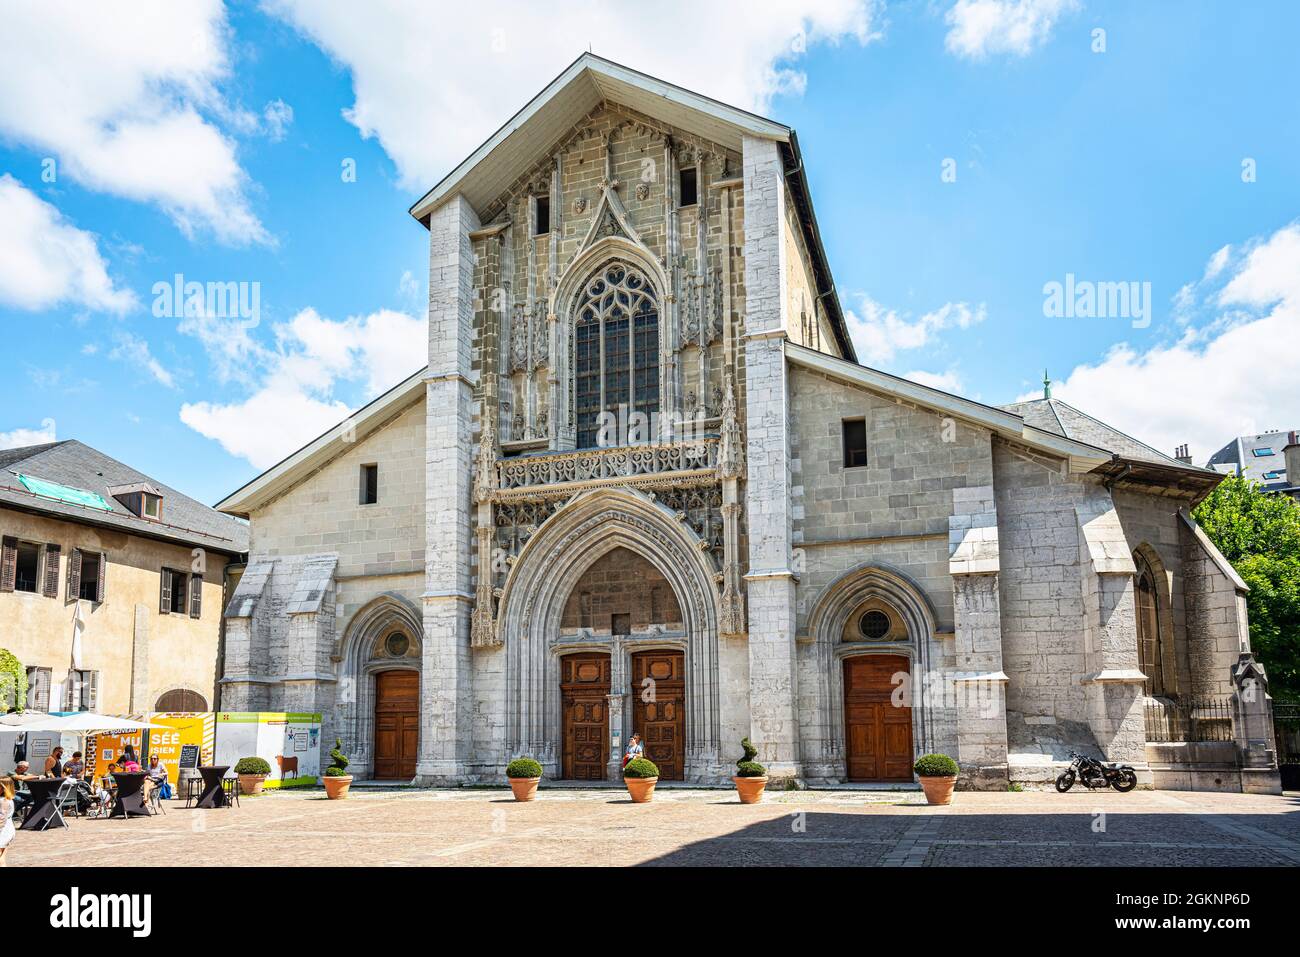 The decorated facade of the Cathedral of Saint Francis de Sales in Chambery. Chambery, Savoie department, Auvergne-Rhône-Alpes region, France, Europe Stock Photo